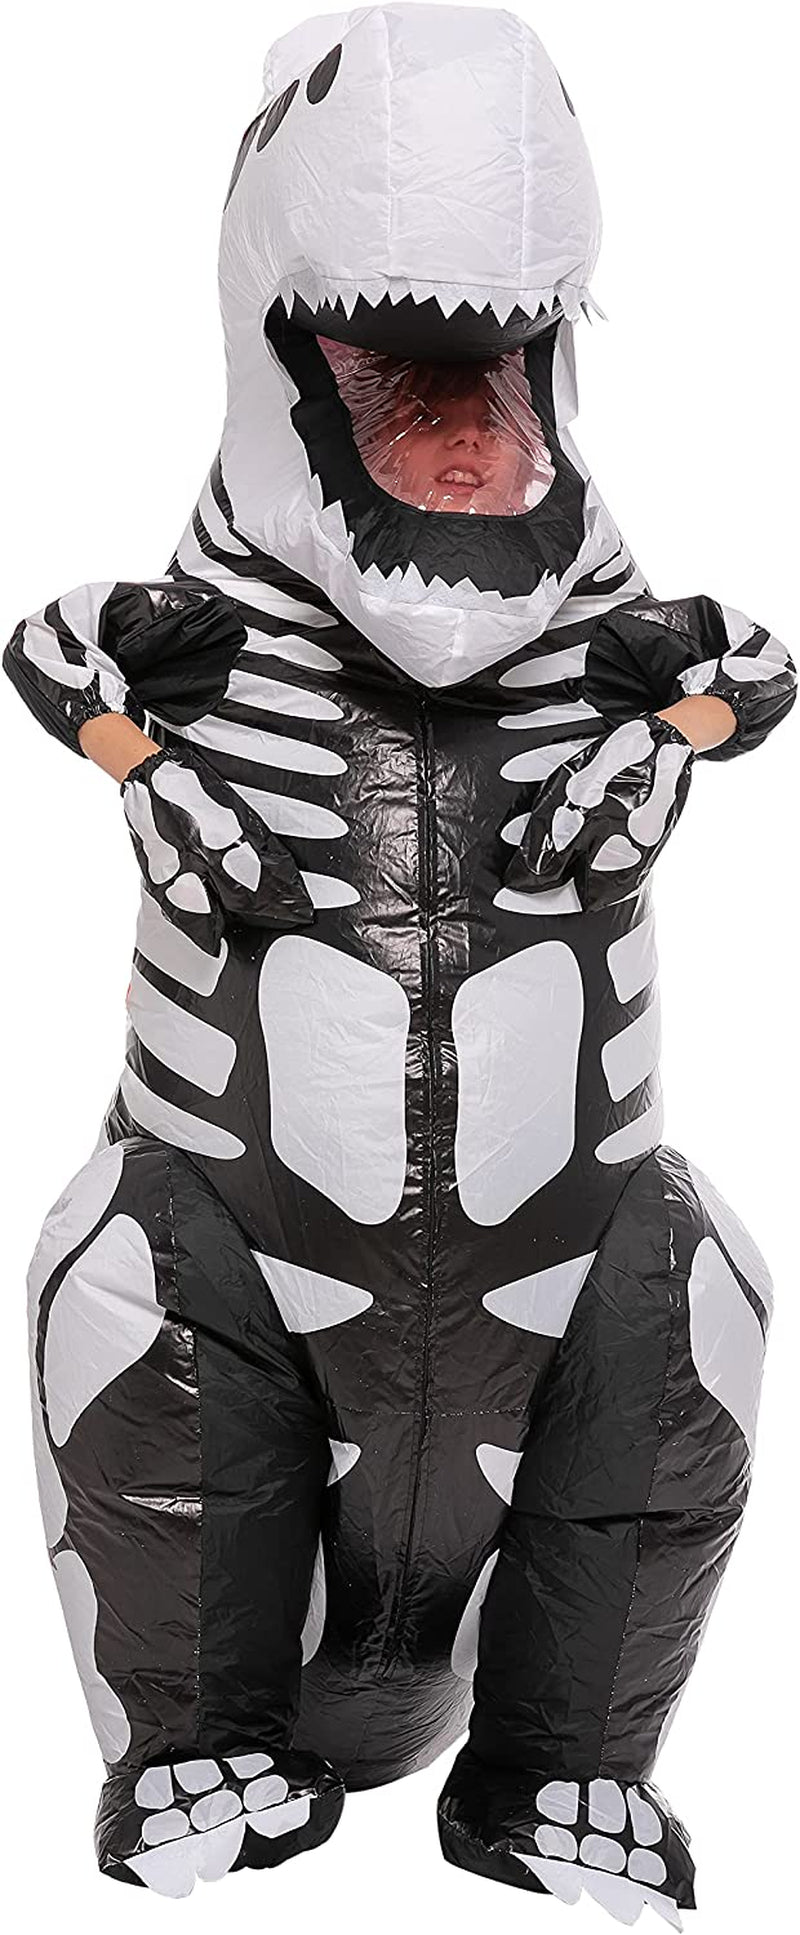 Spooktacular Creations Inflatable Halloween Costume over 8 Ft Skeleton Dinosaur Full Body Skeleton T-Rex Inflatable Costume - Child  7 years and up   